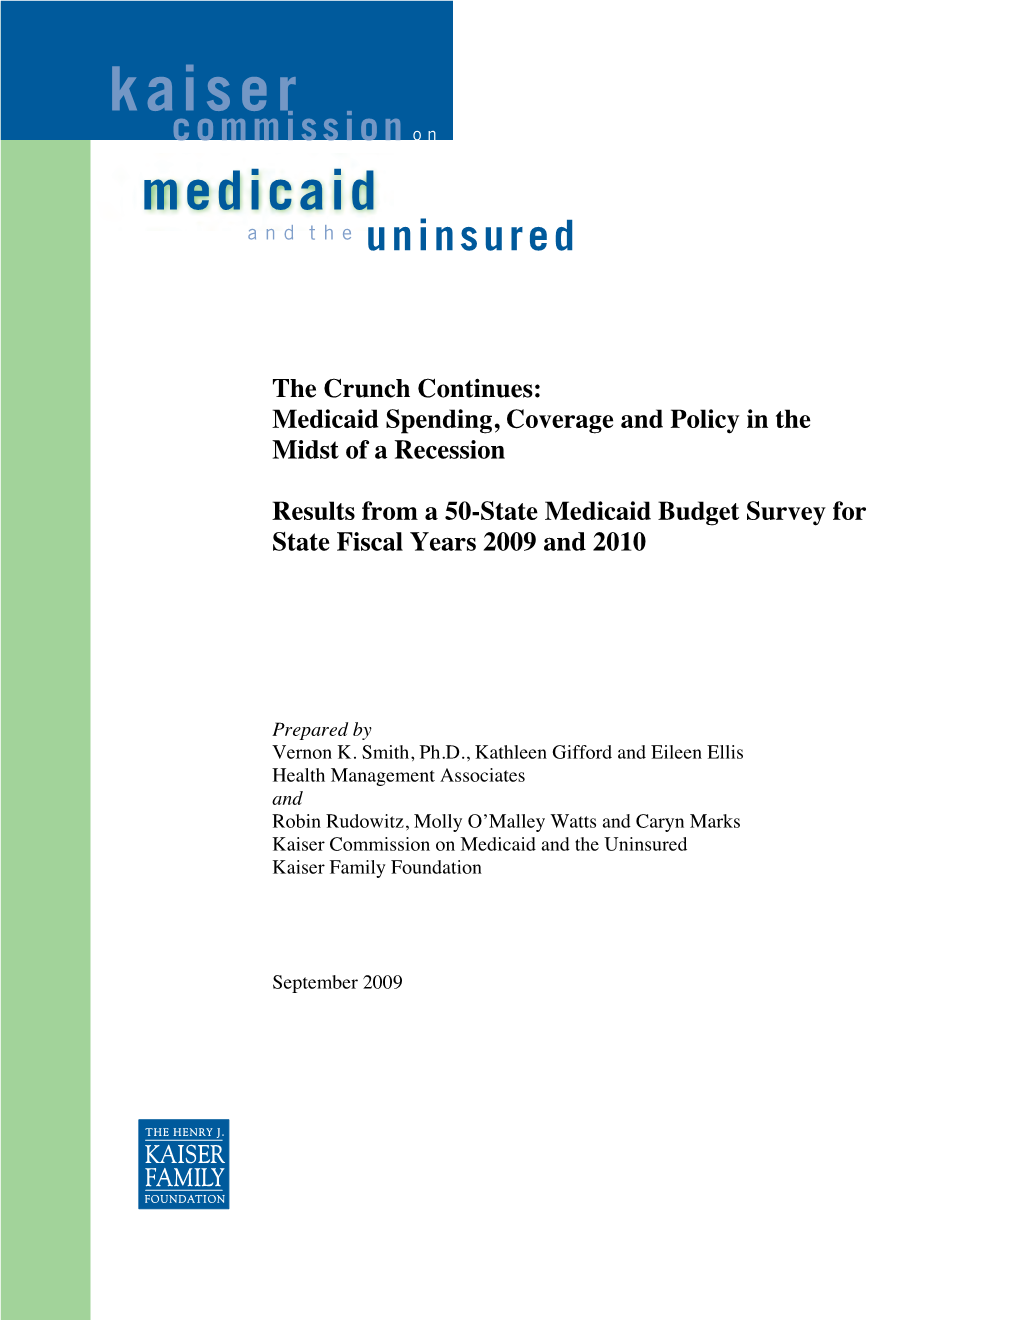 Medicaid Spending, Coverage and Policy in the Midst of a Recession